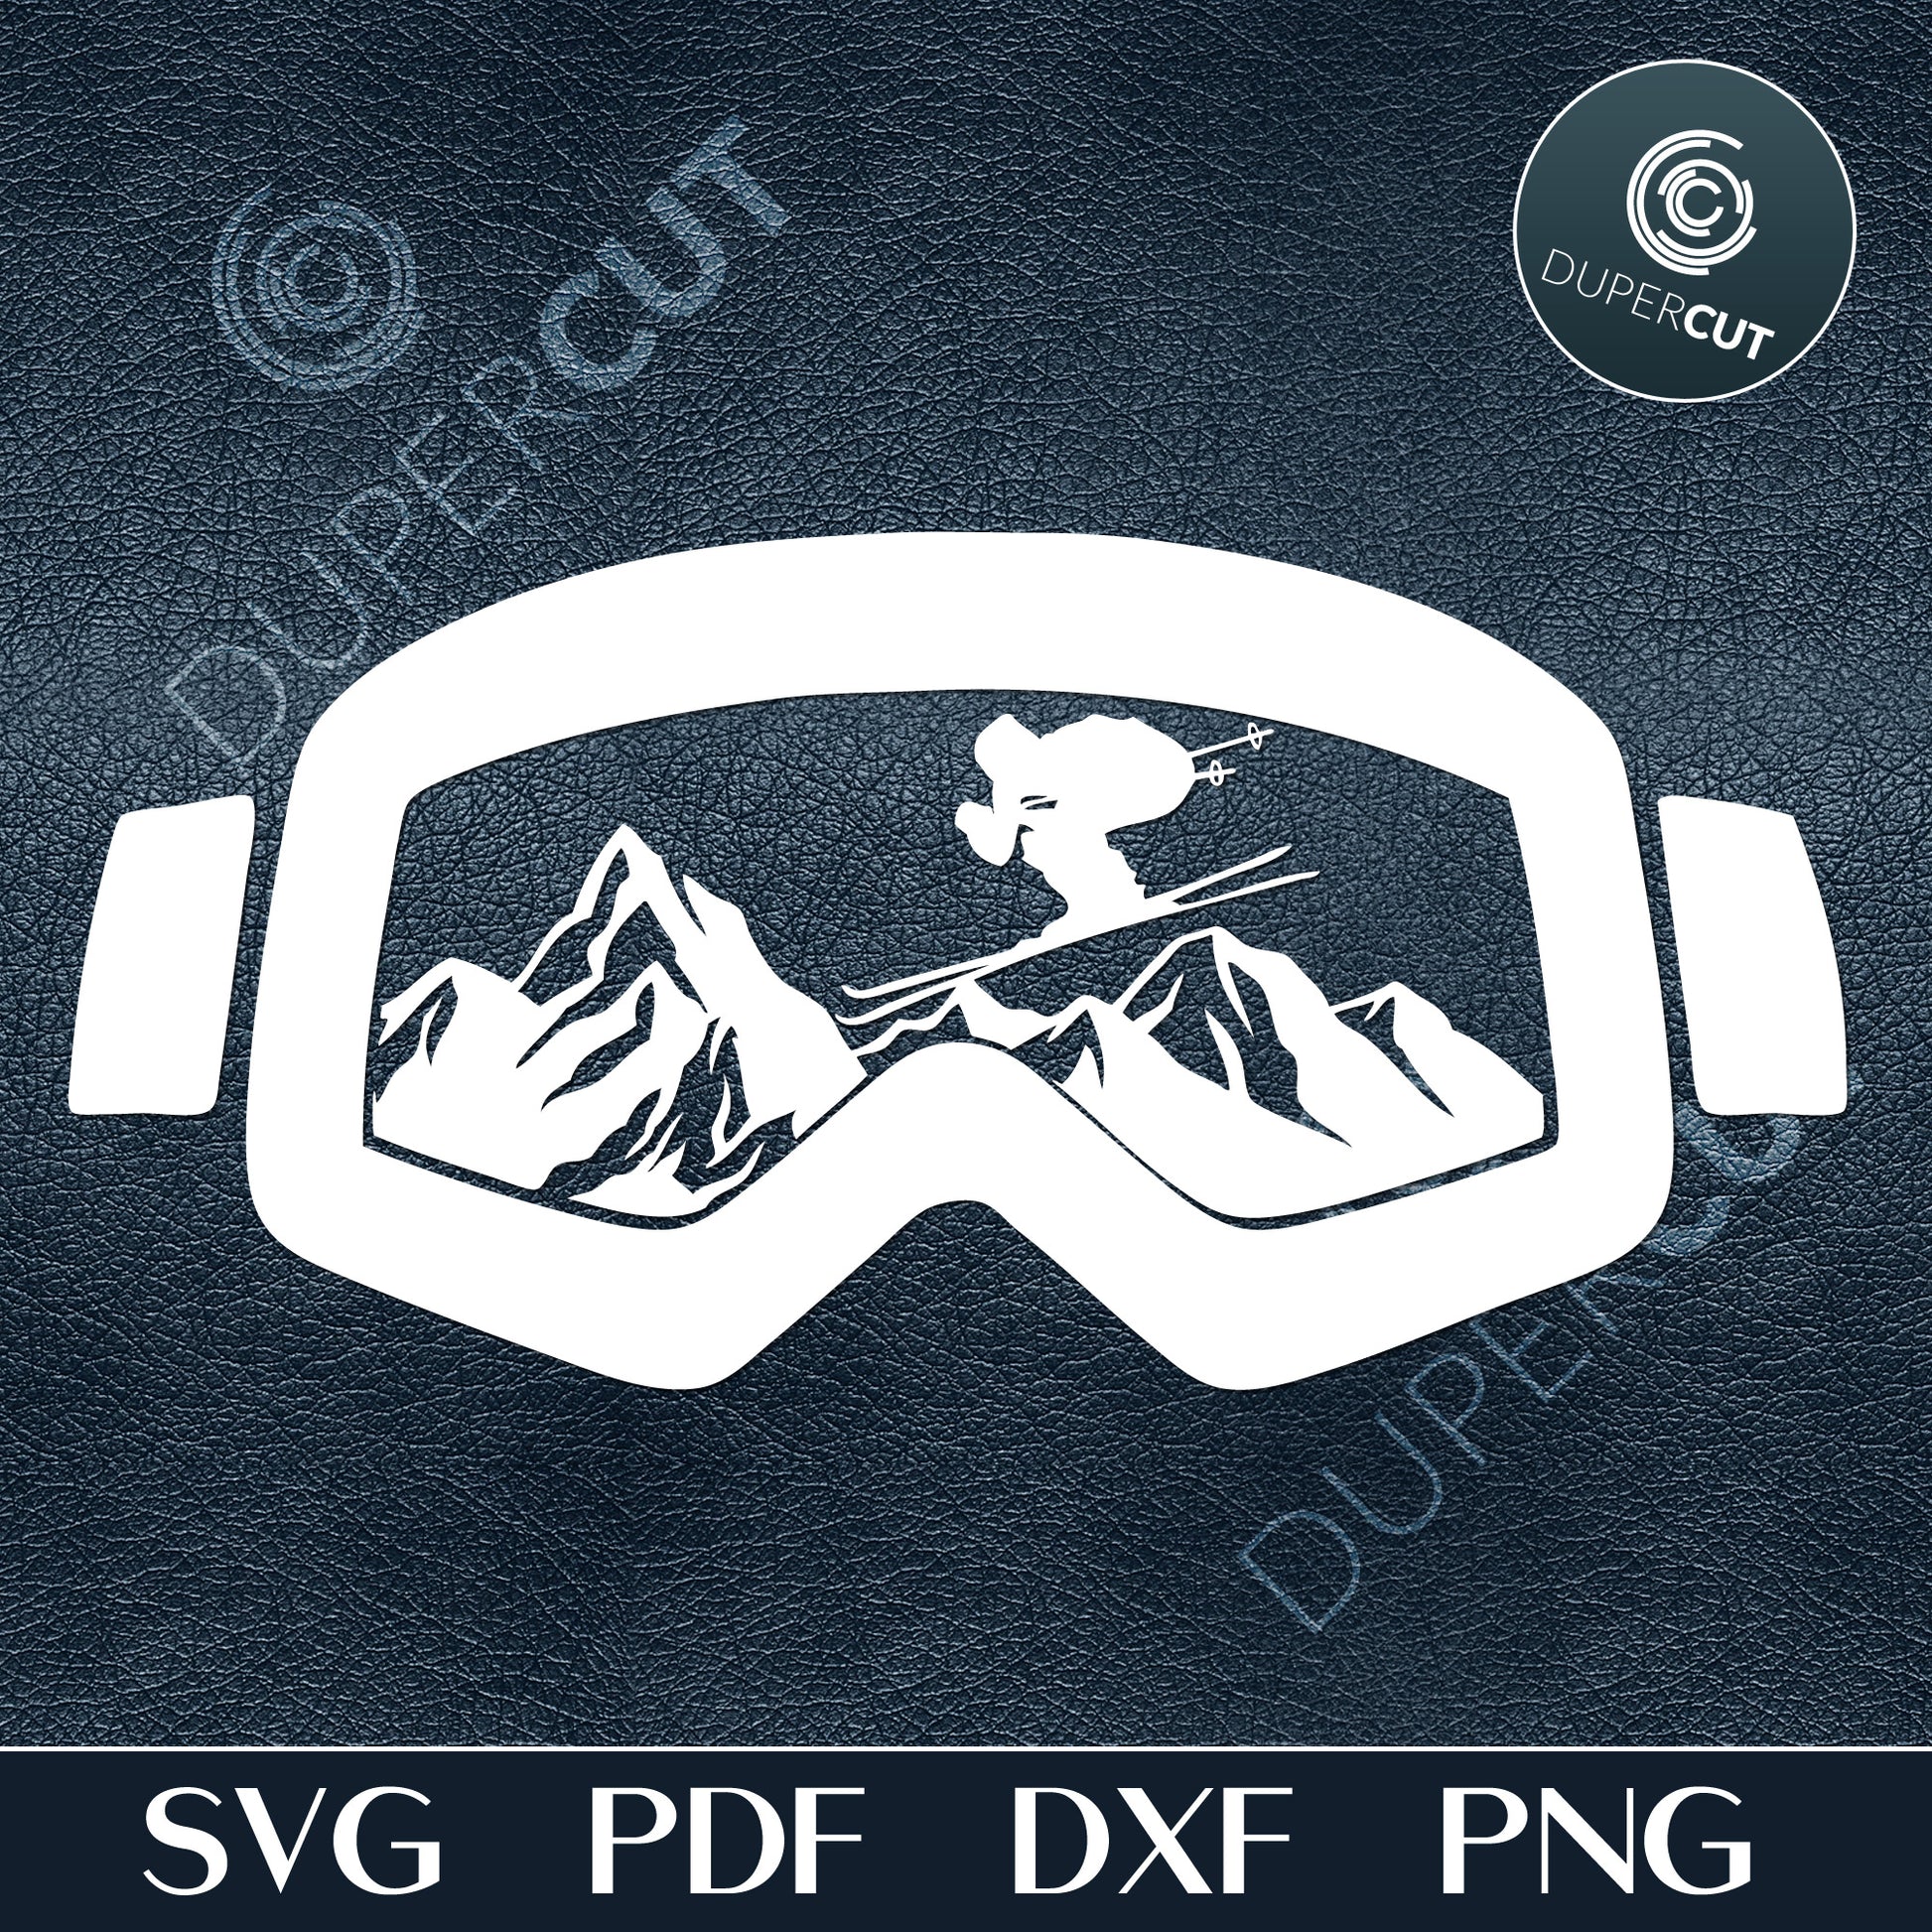 Goggles with skier and mountains. SVG PNG DXF cutting files for Cricut, Silhouette, Glowforge, print on demand, sublimation templates